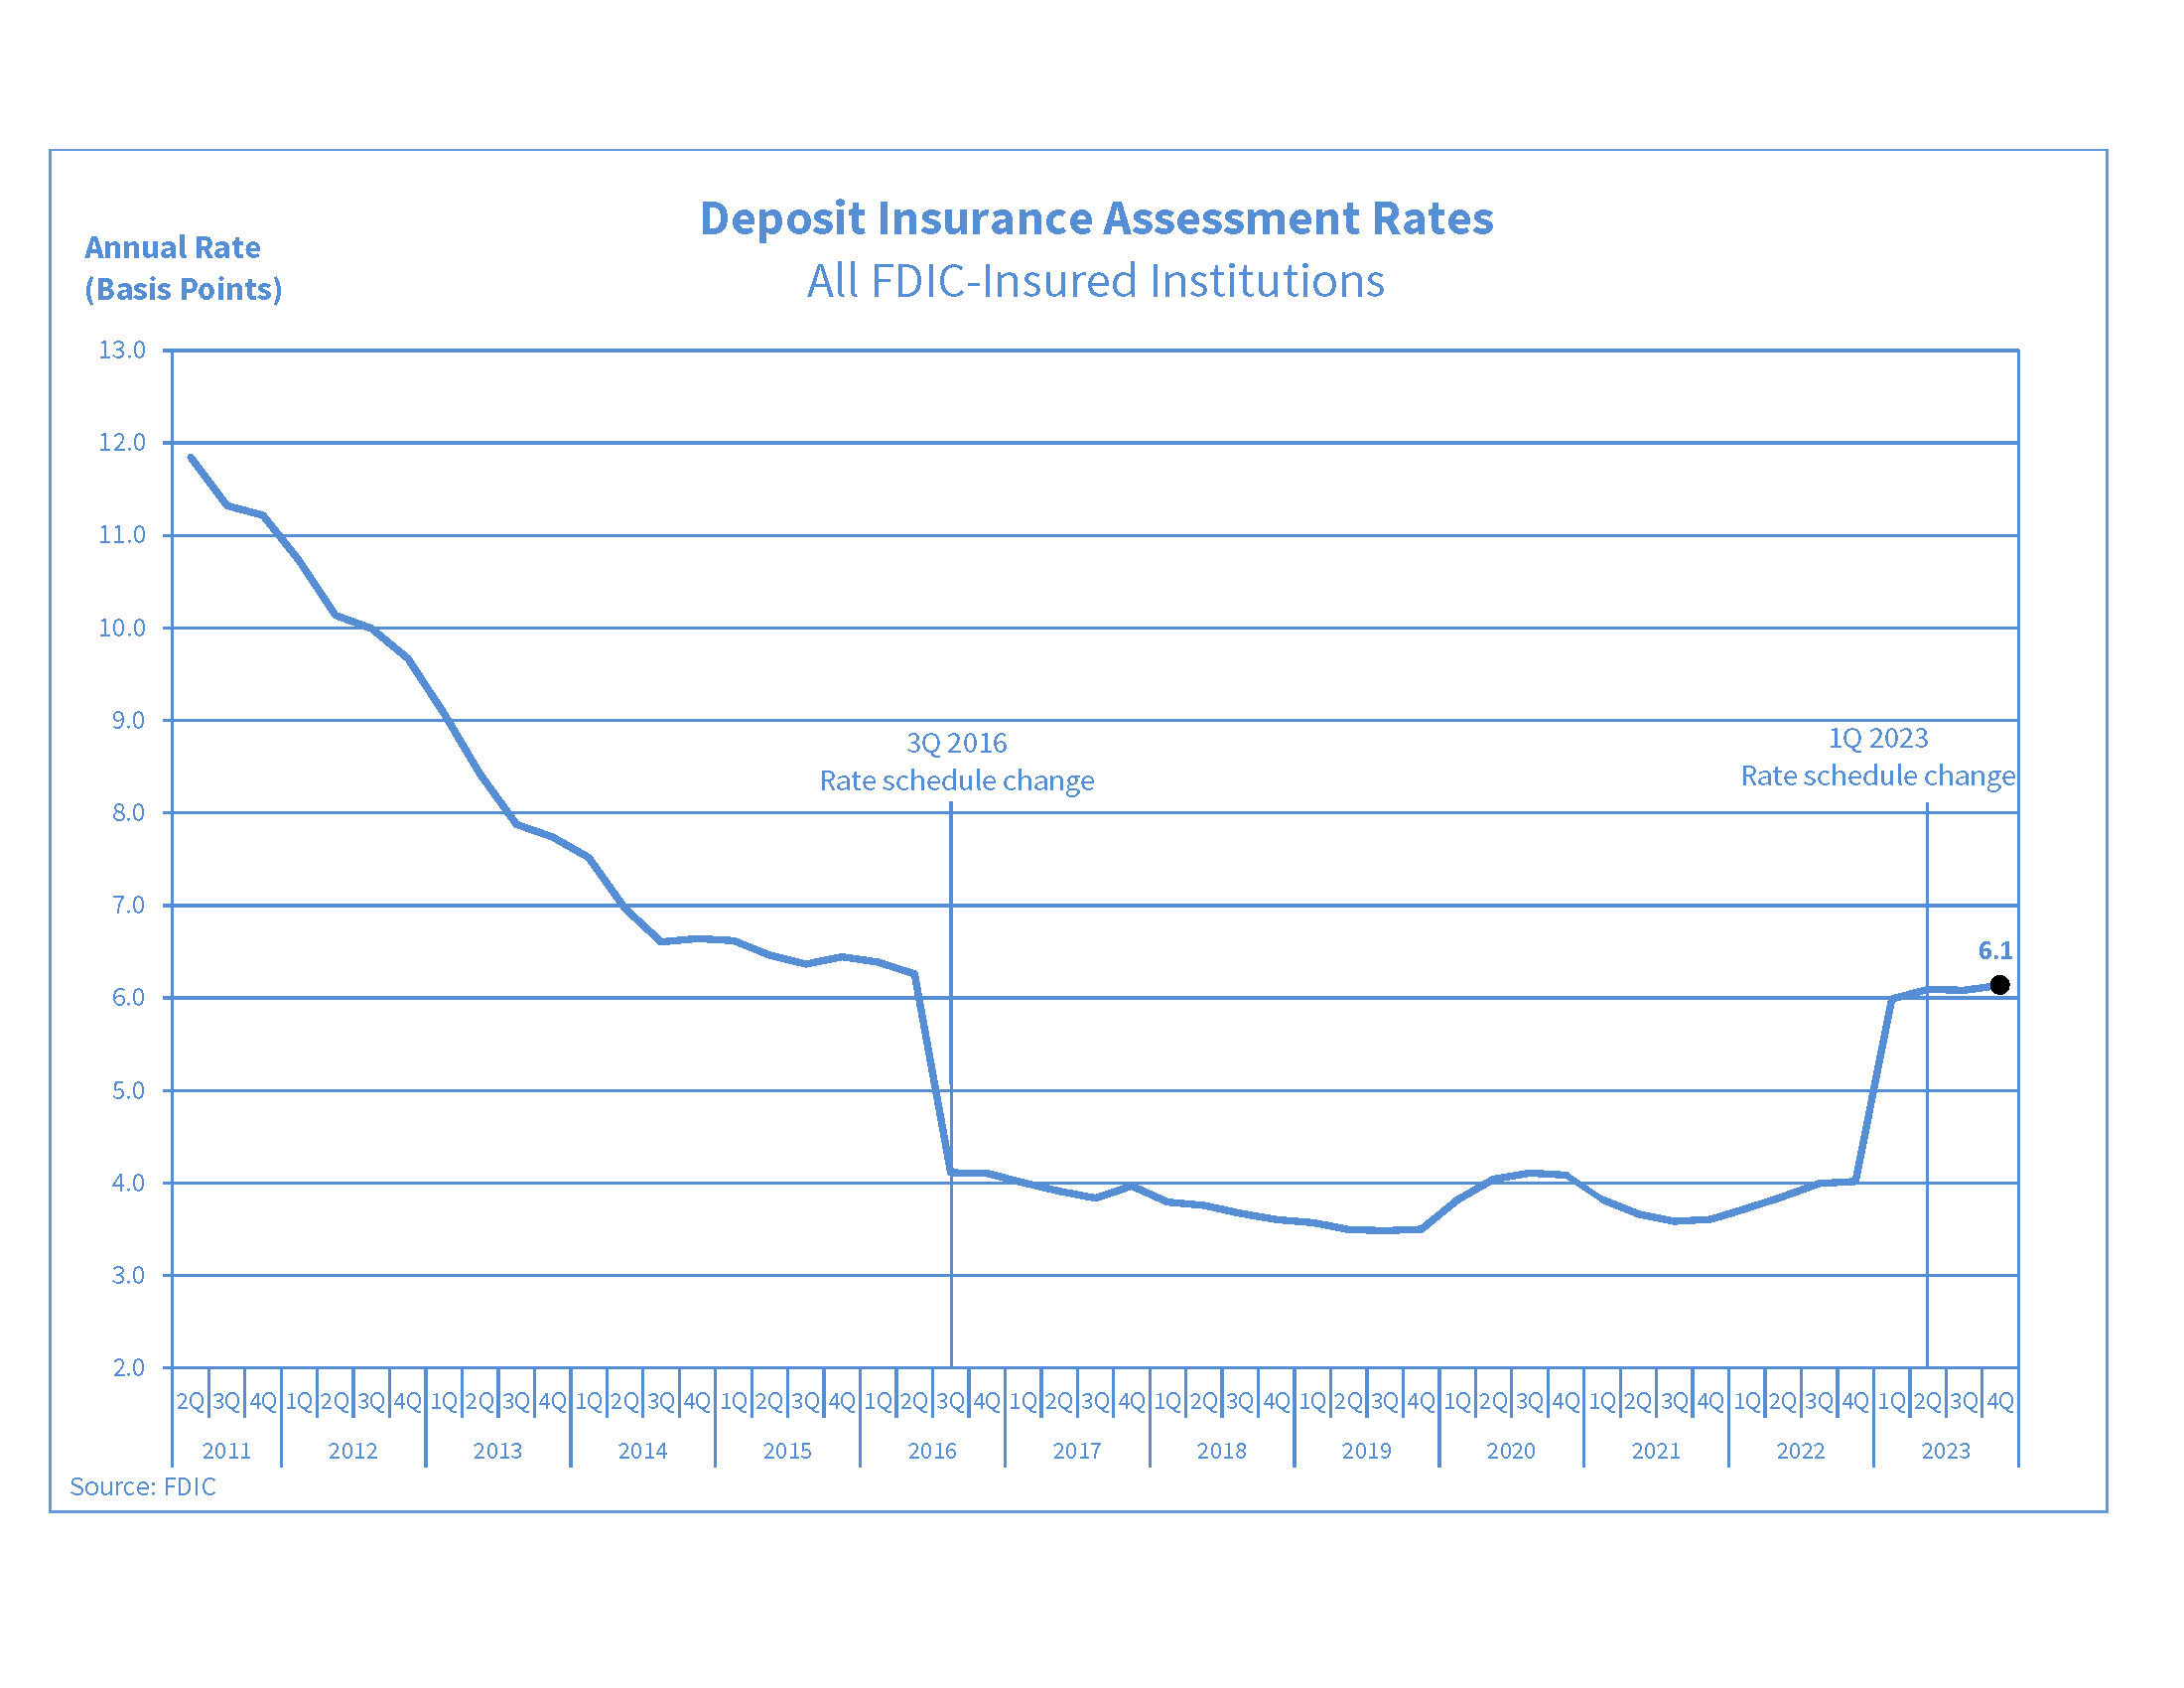 Deposit Insurance Assessment Rates for All FDIC Institutions Graph, showing downward trend in the annual rate's basis points since 2nd Quarter 2011 to 2nd Quarter 2018.  With the latest standing at 3.7 basis points, finishing first half for 2018.